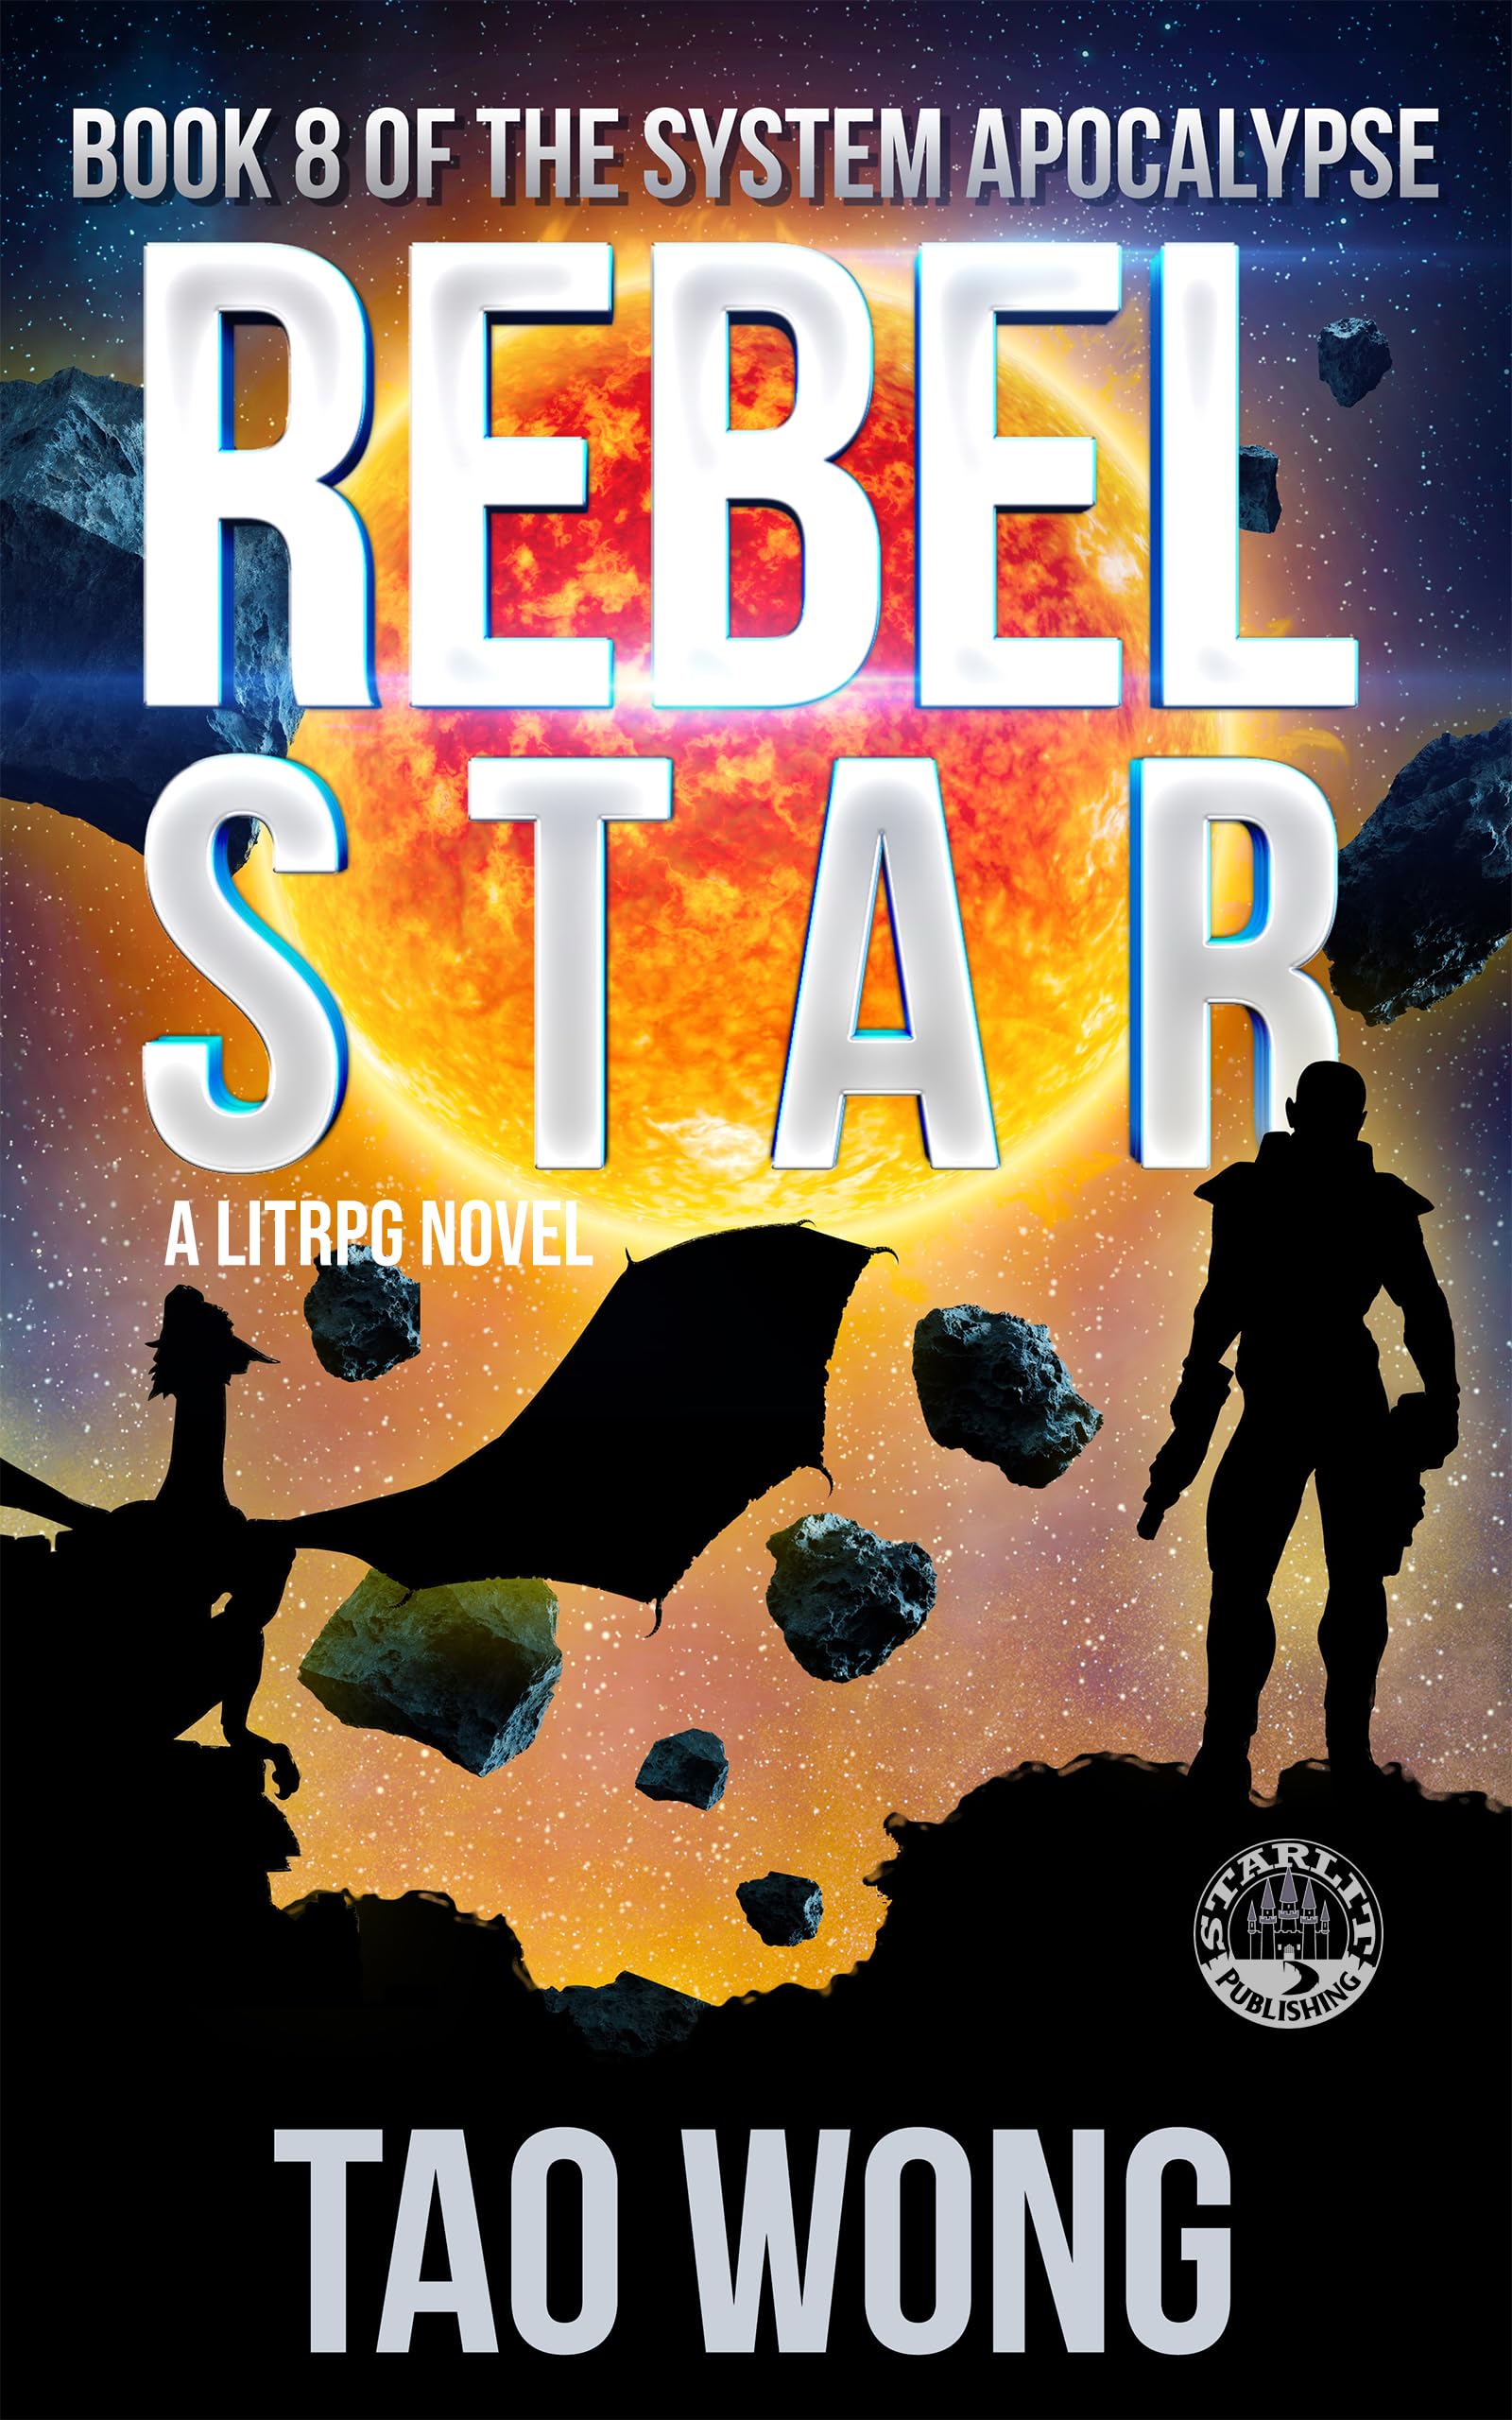 Book Cover Rebel Star: An Apocalyptic LitRPG (The System Apocalypse Book 8)